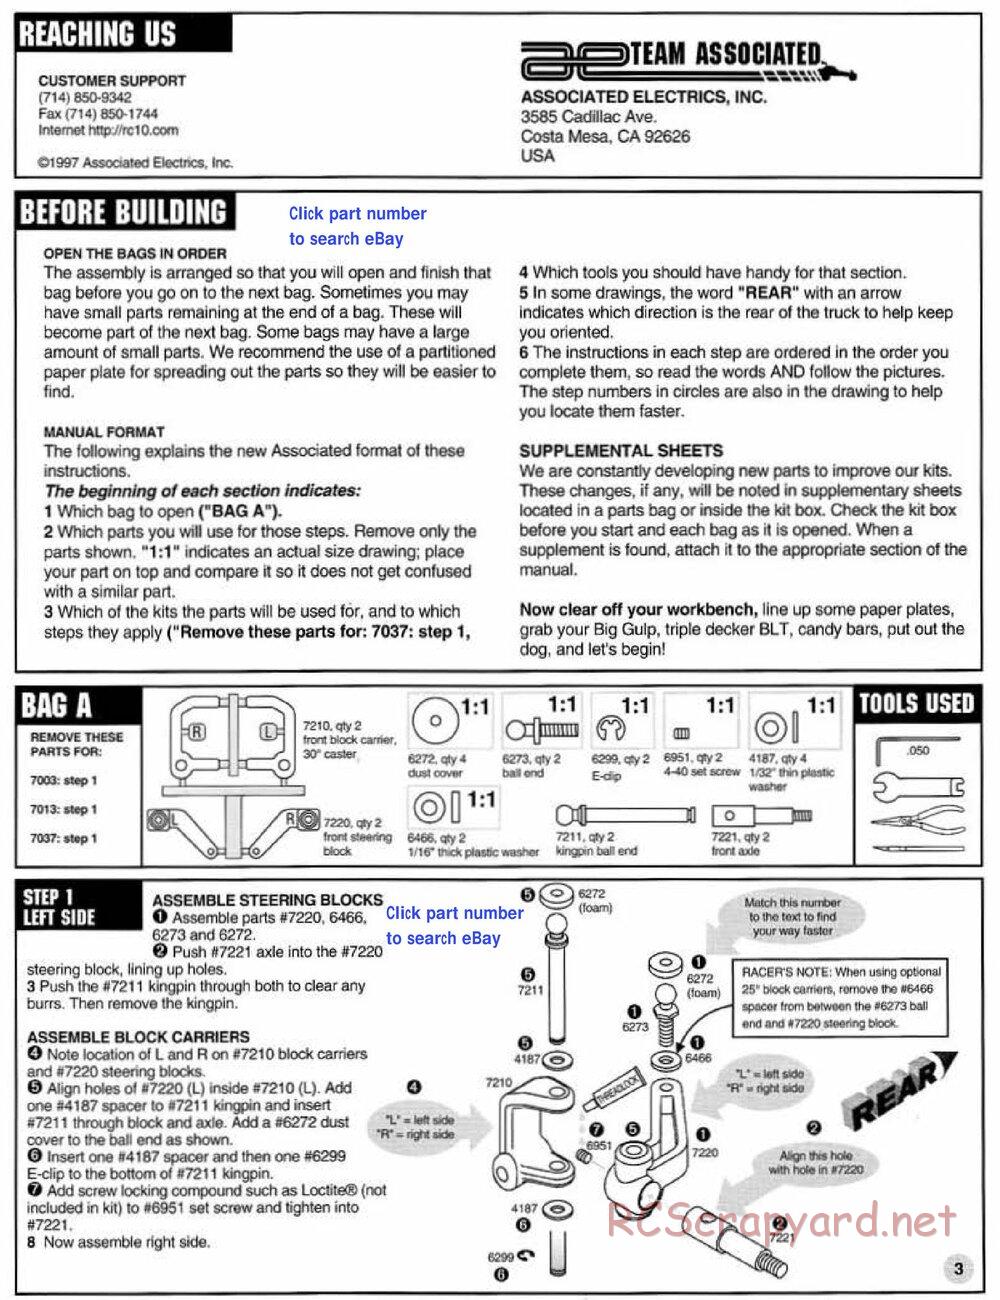 Team Associated - RC10T3 (1997) - Manual - Page 3